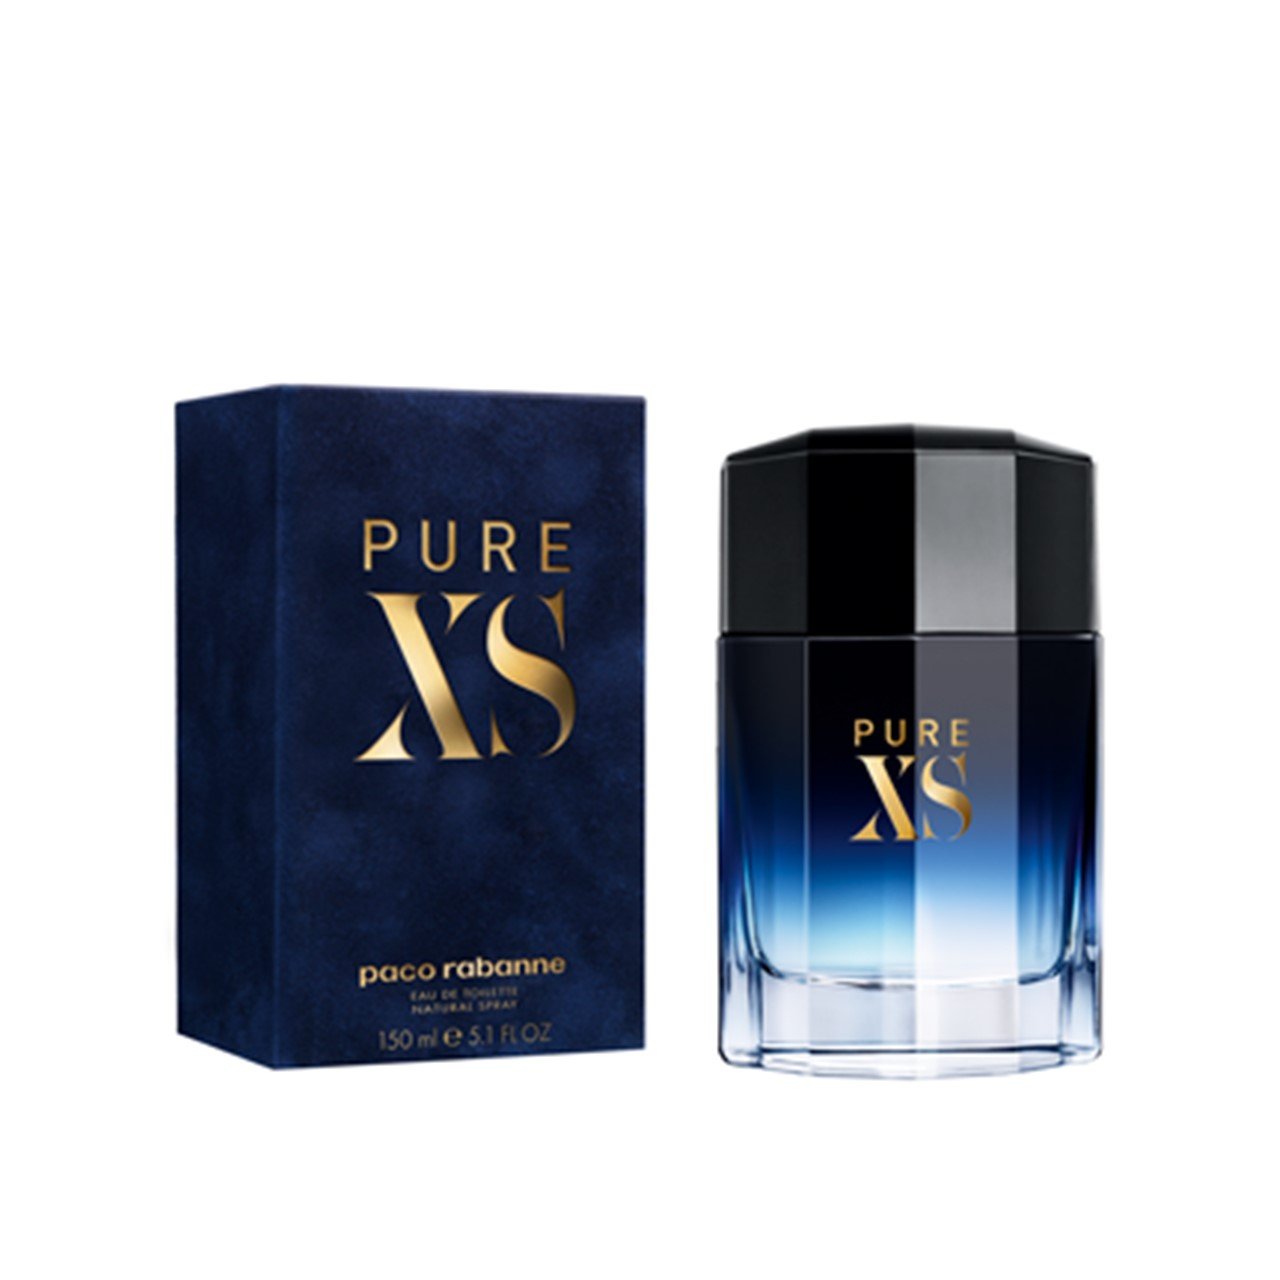 PACO RABANNE – PURE XS FOR HIM EDT 150mL